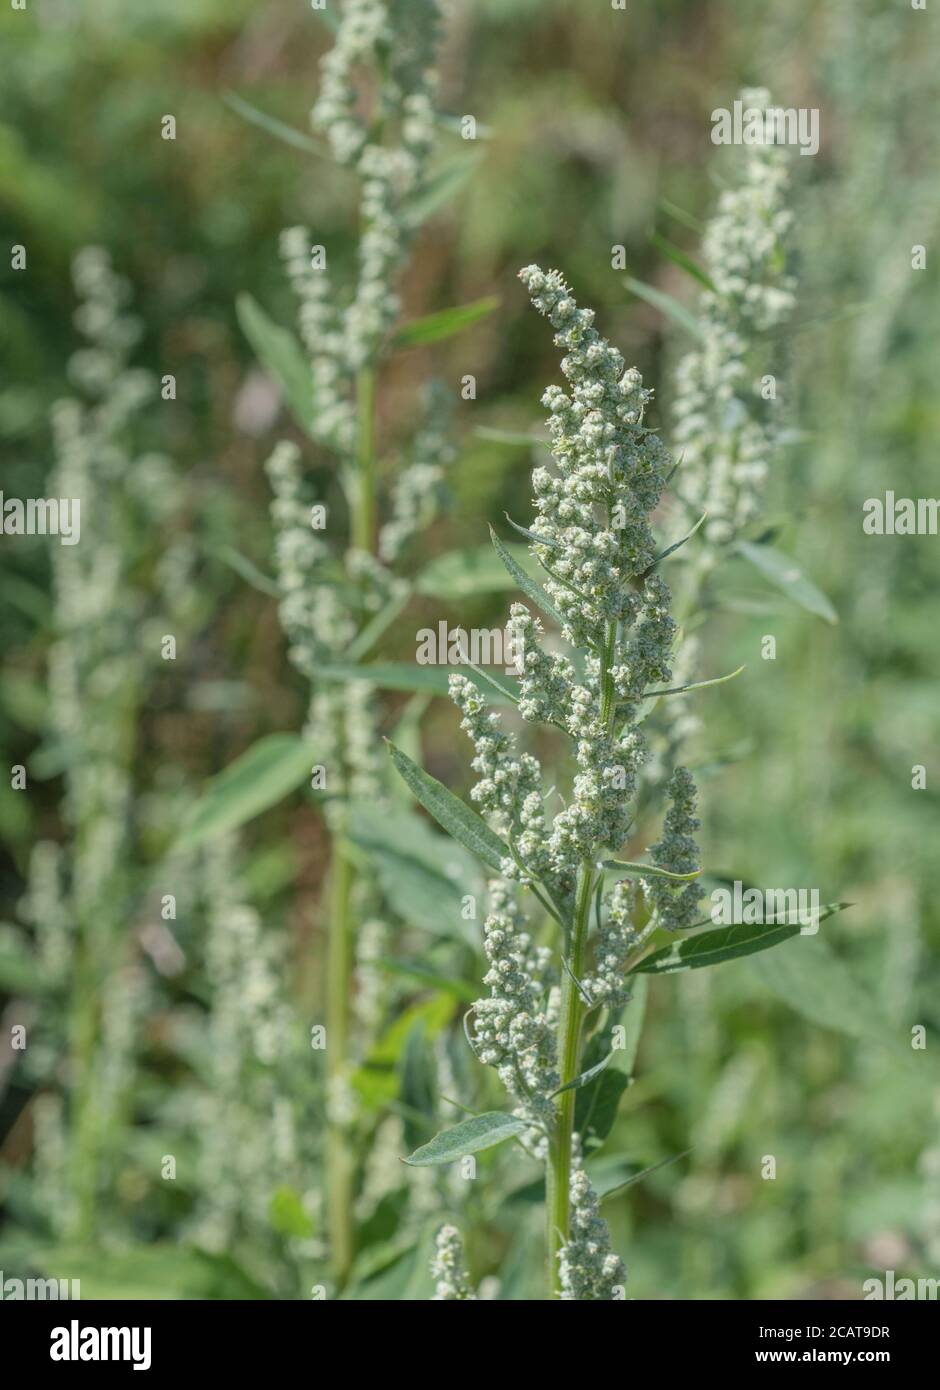 Close shot Fat-Hen / Chenopodium album flowerhead. Agricultural weed that is edible & was once used as food. Now a foraged wild survival food Stock Photo